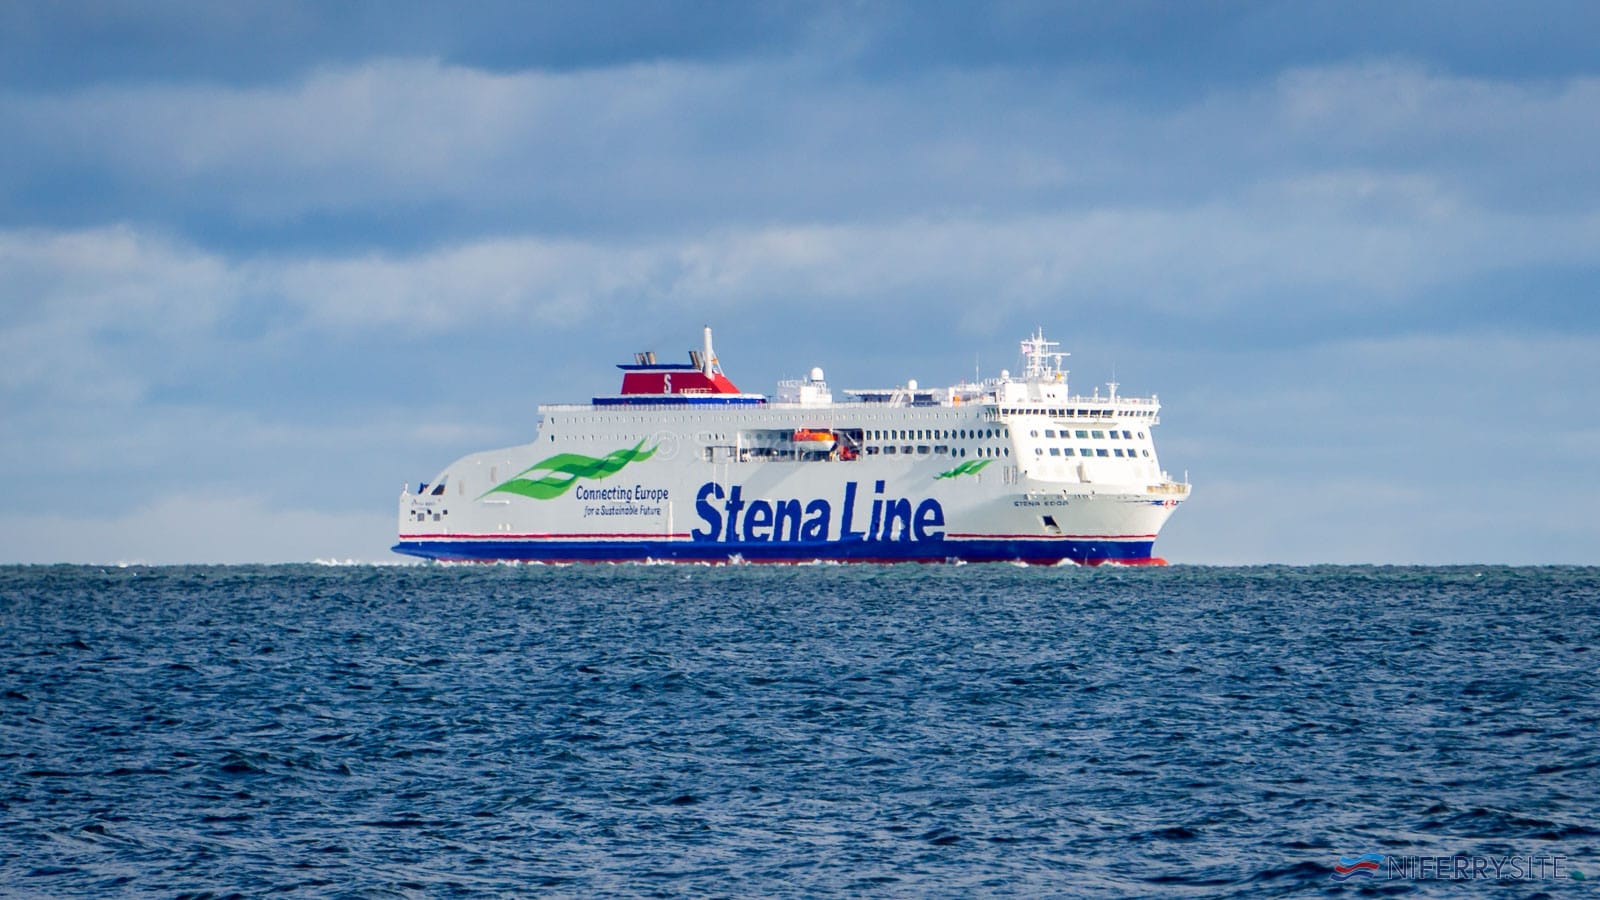 STENA EDDA at anchor off Groomsport on the morning of her first arrival in UK waters, 25.02.00. Copyright © Steven Tarbox.